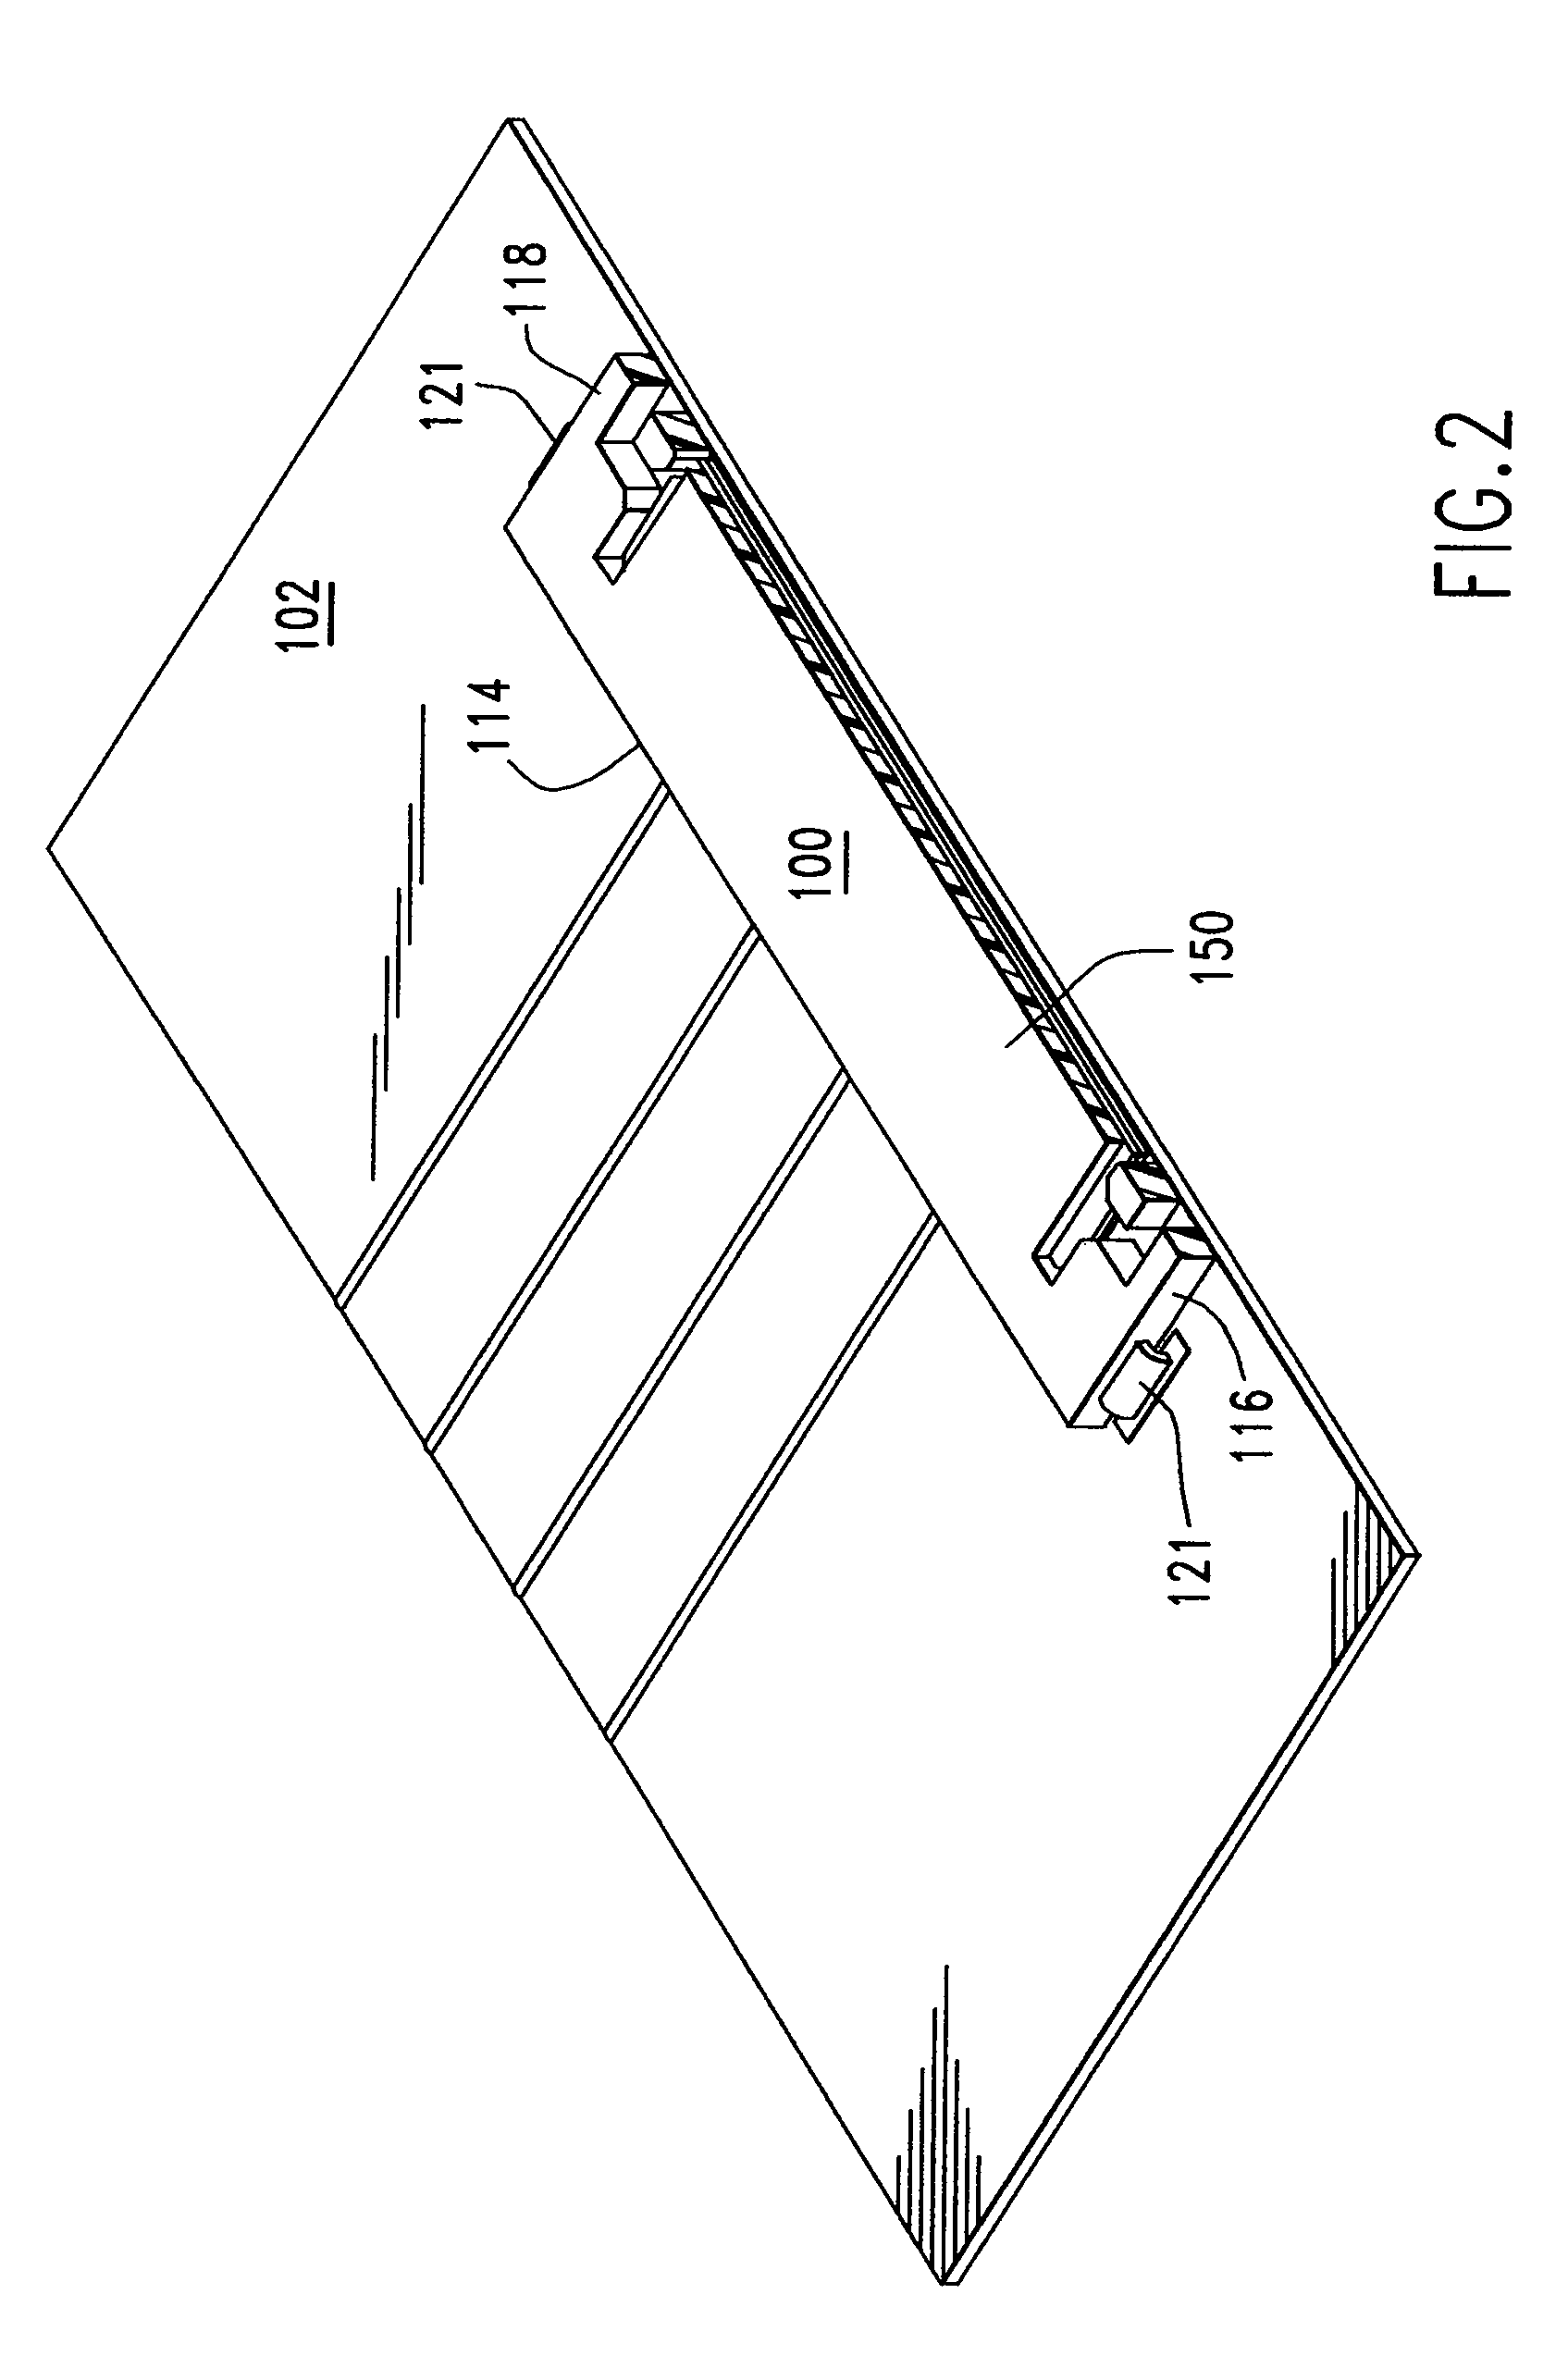 Capacitively coupled connector for flexible printed circuit applications